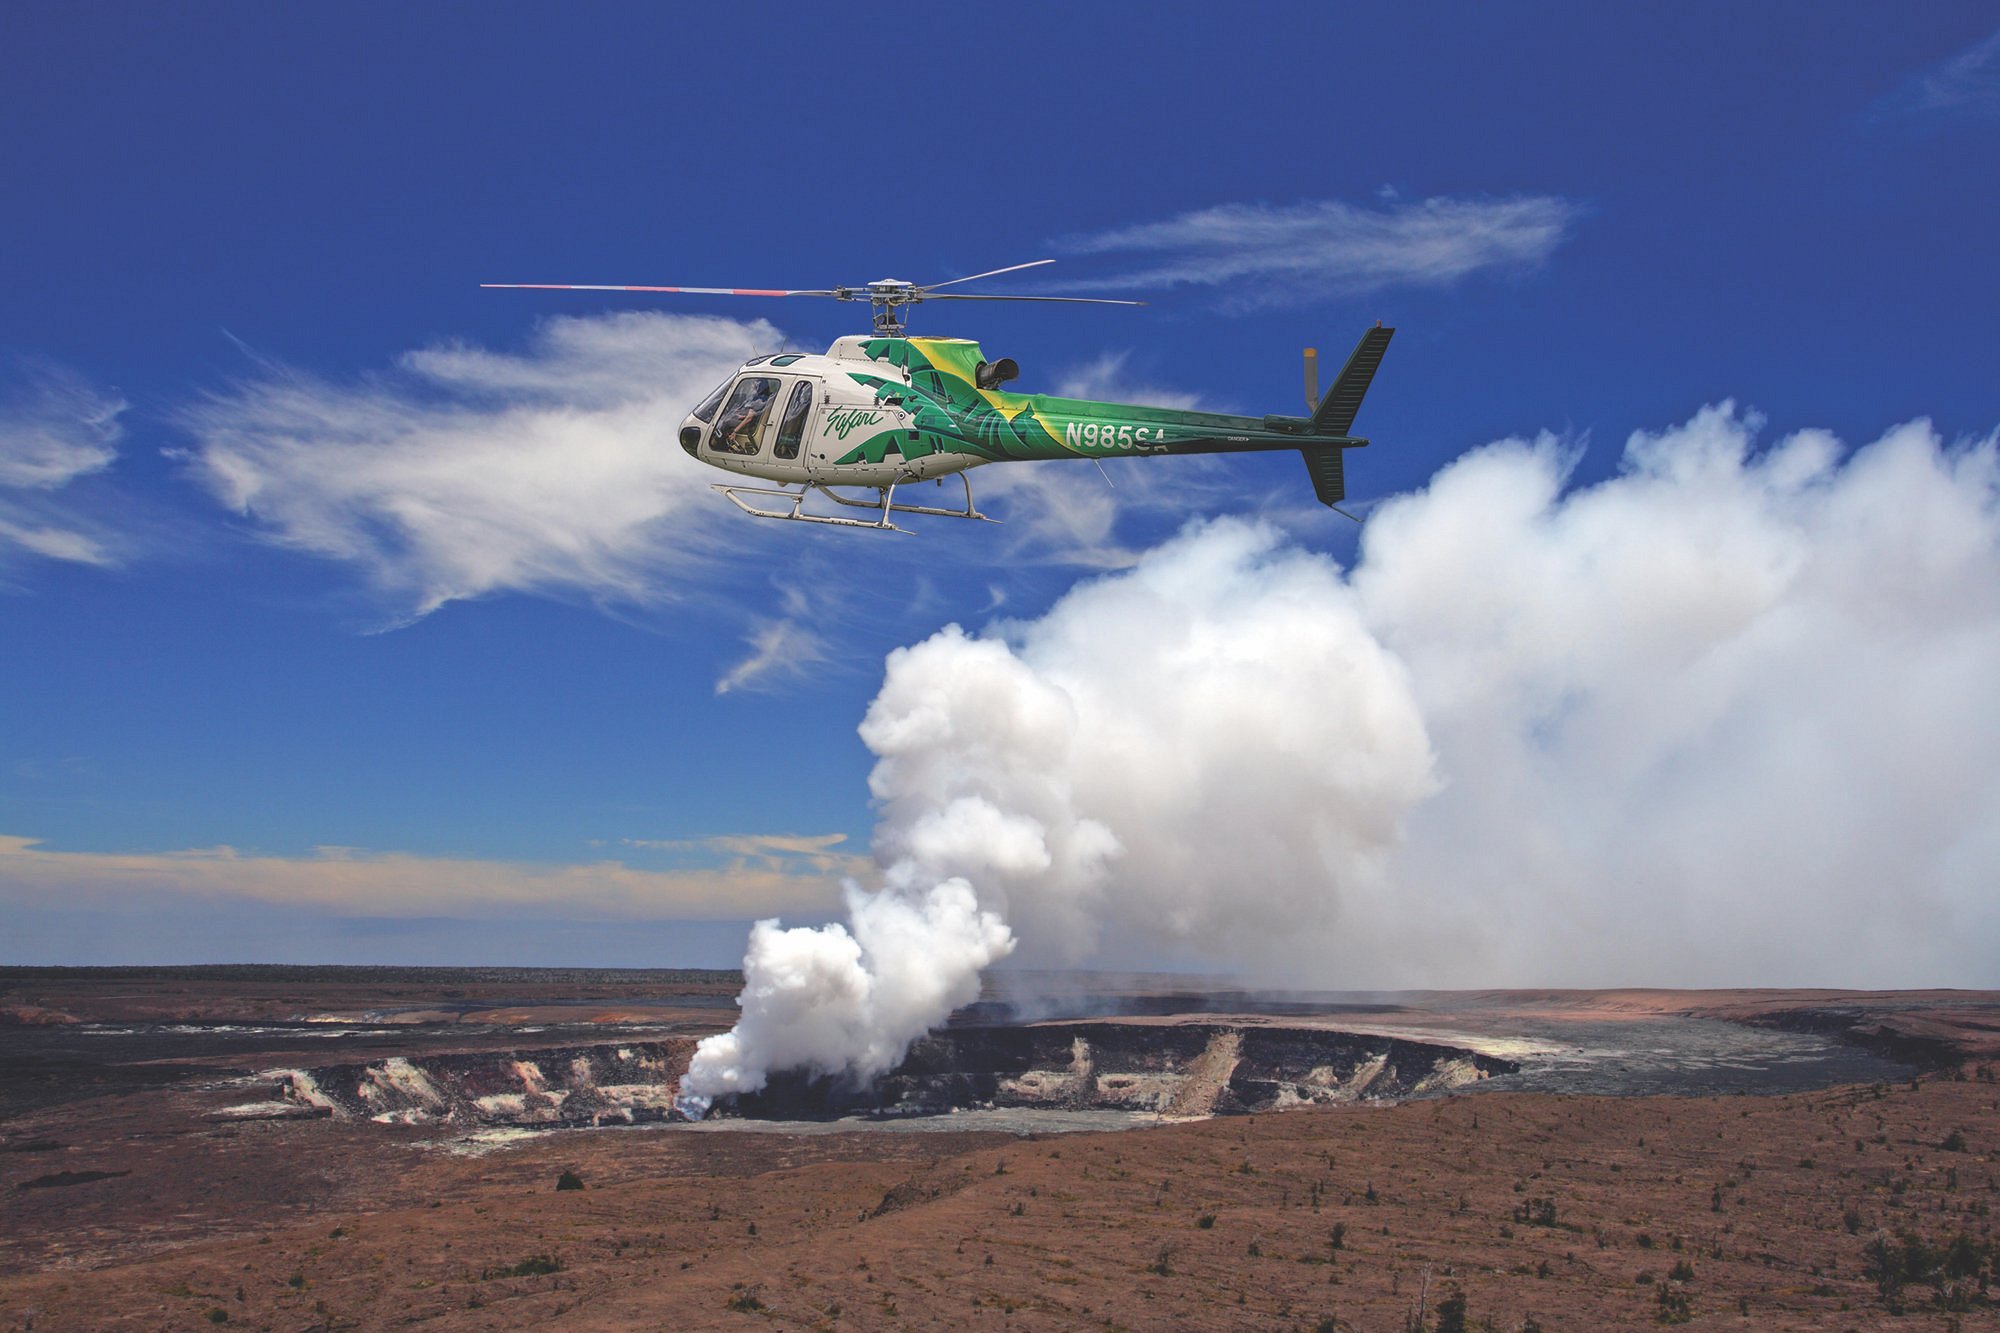 safari helicopters hilo safety record